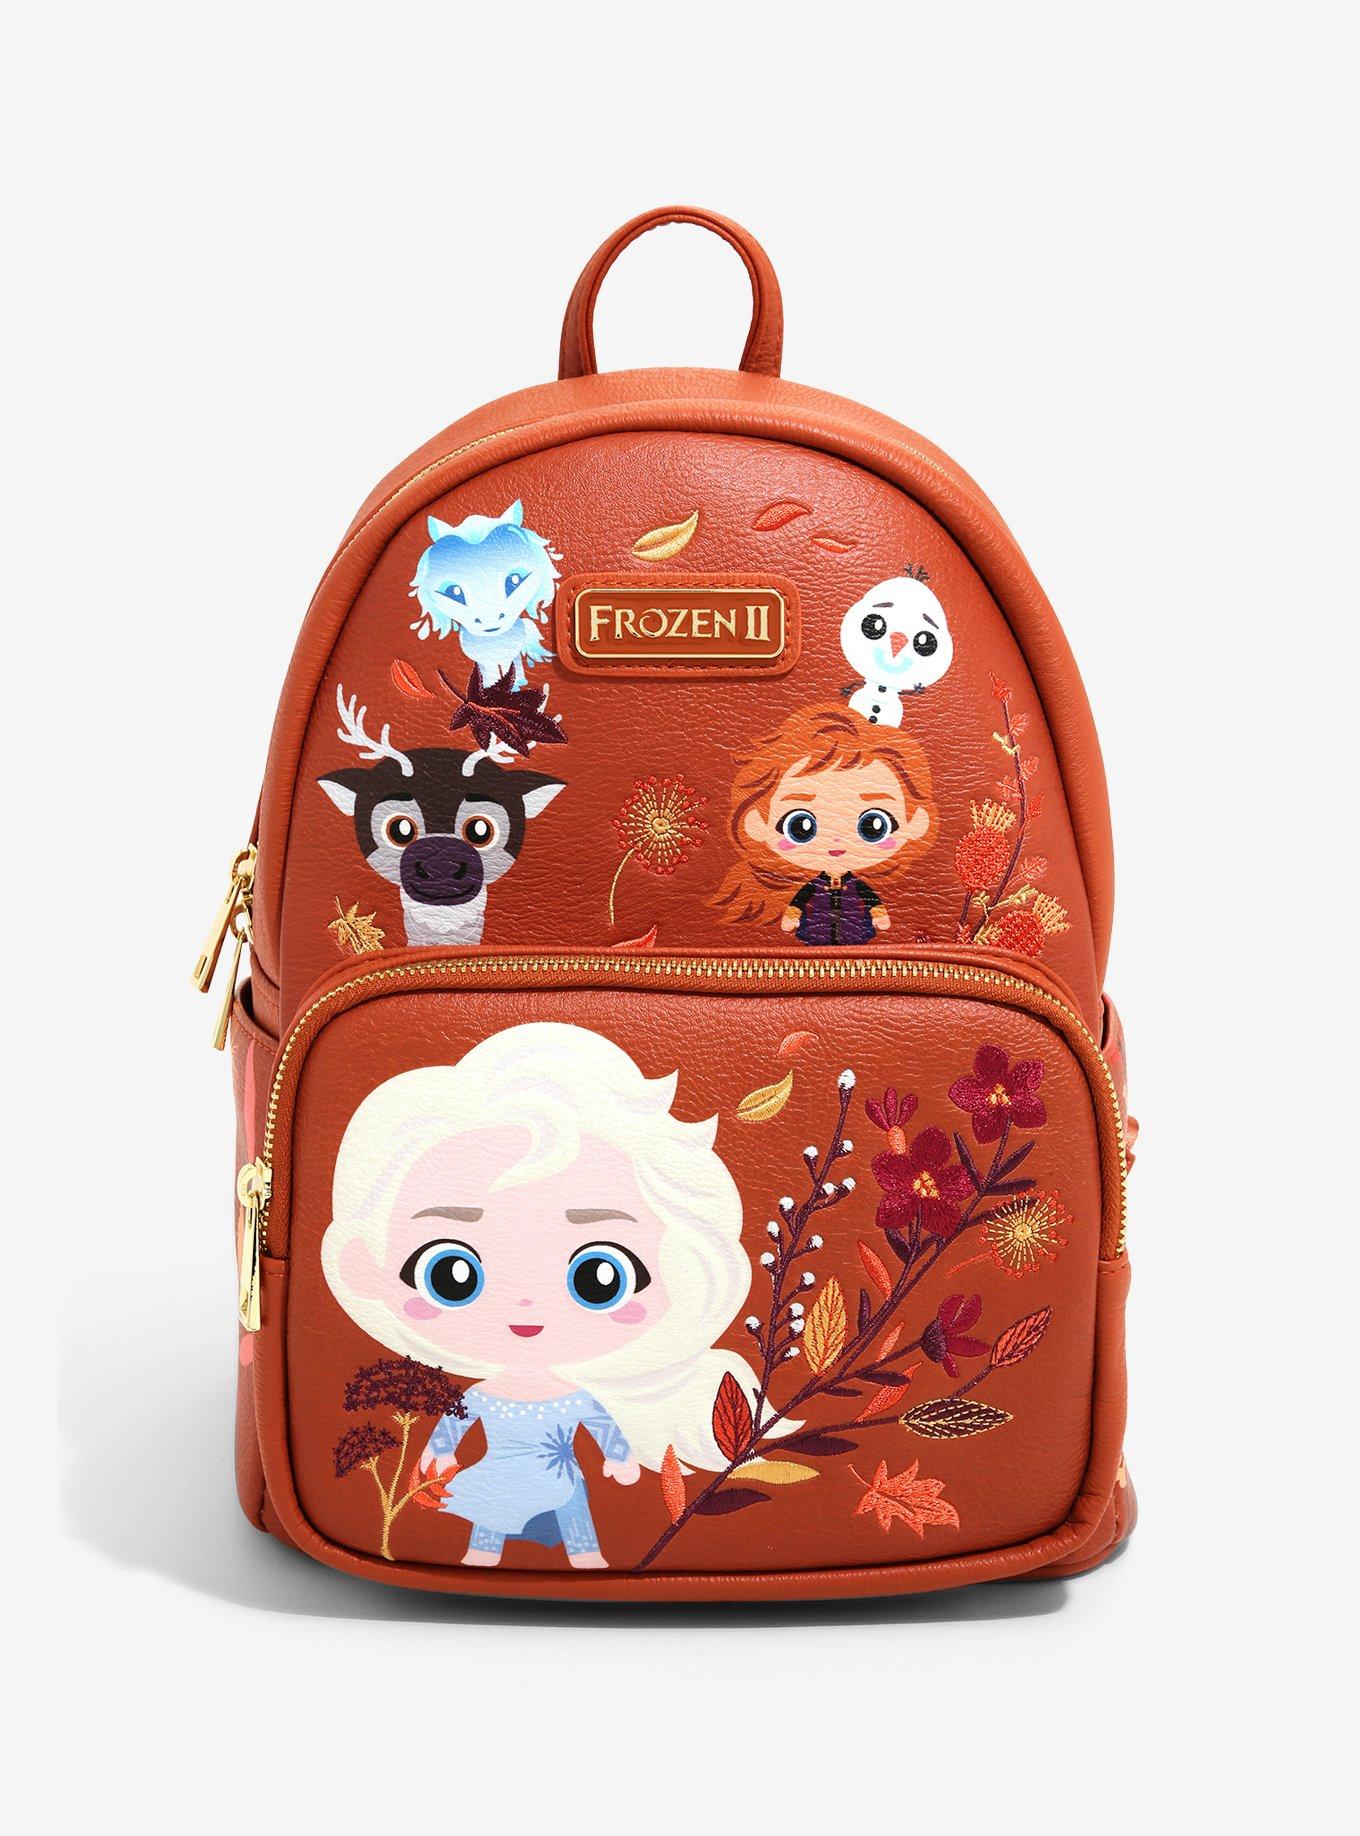 Avatar: The Last Airbender Chibi Animals Mini Backpack - BoxLunch